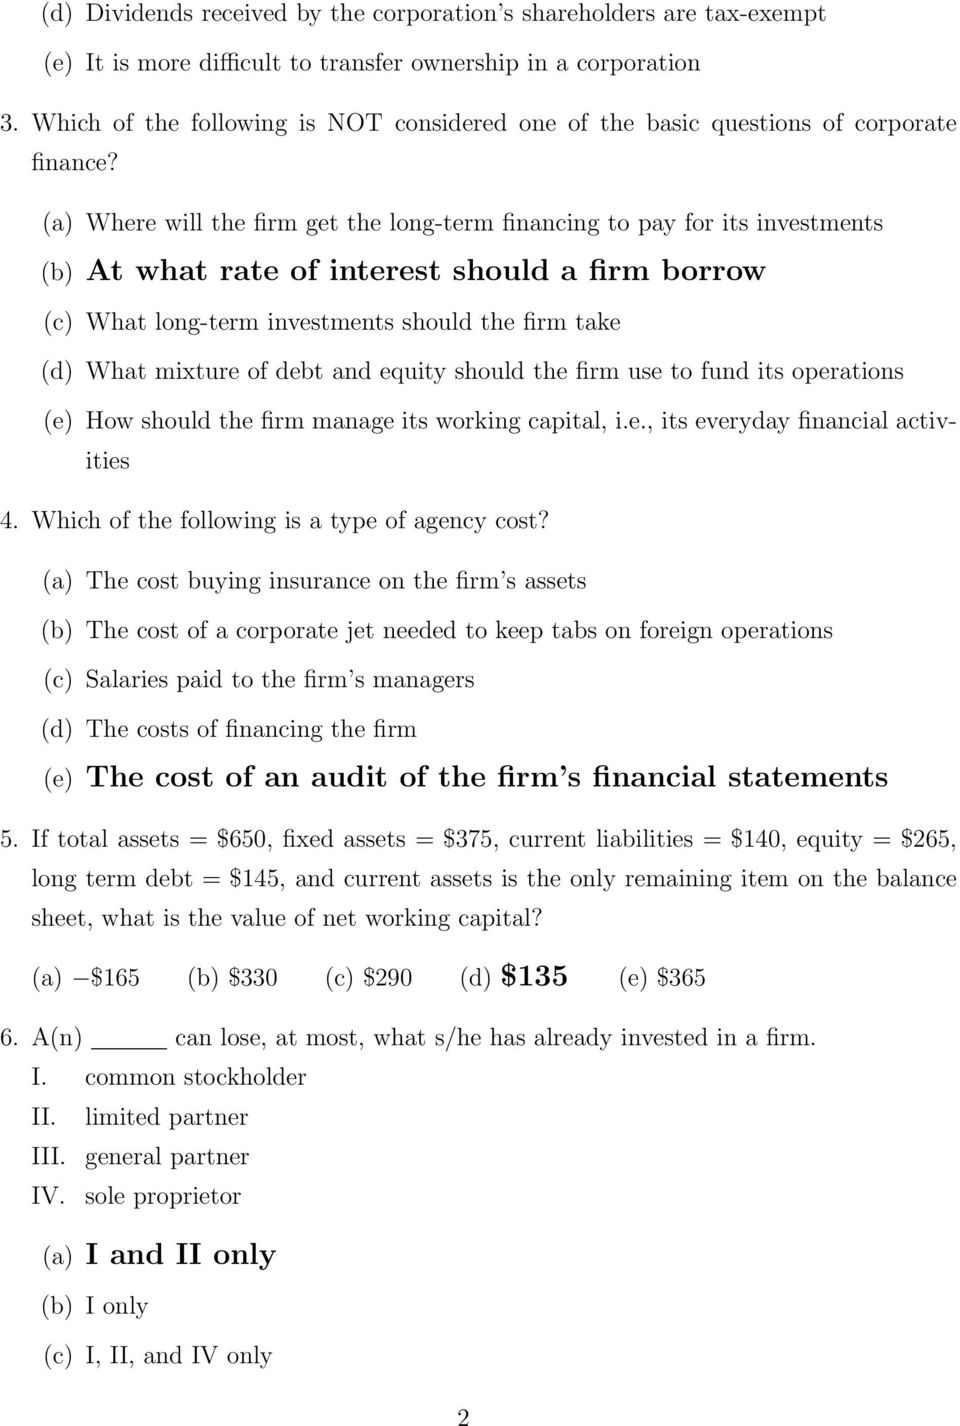 (a) Where will the firm get the long-term financing to pay for its investments (b) At what rate of interest should a firm borrow (c) What long-term investments should the firm take (d) What mixture